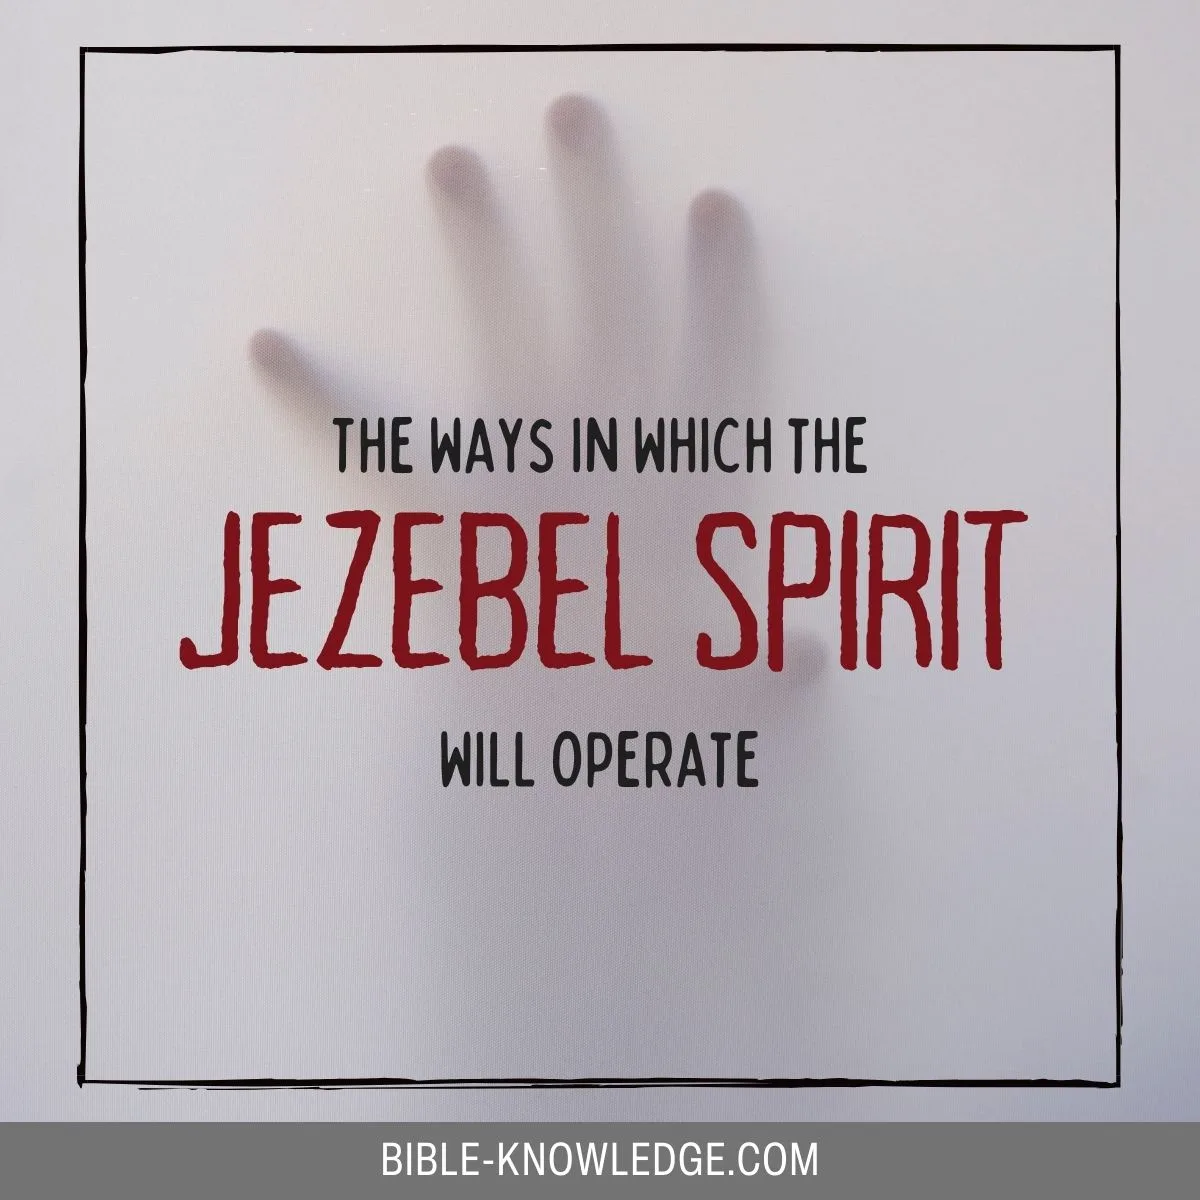 The Ways in Which the Jezebel Spirit Will Operate